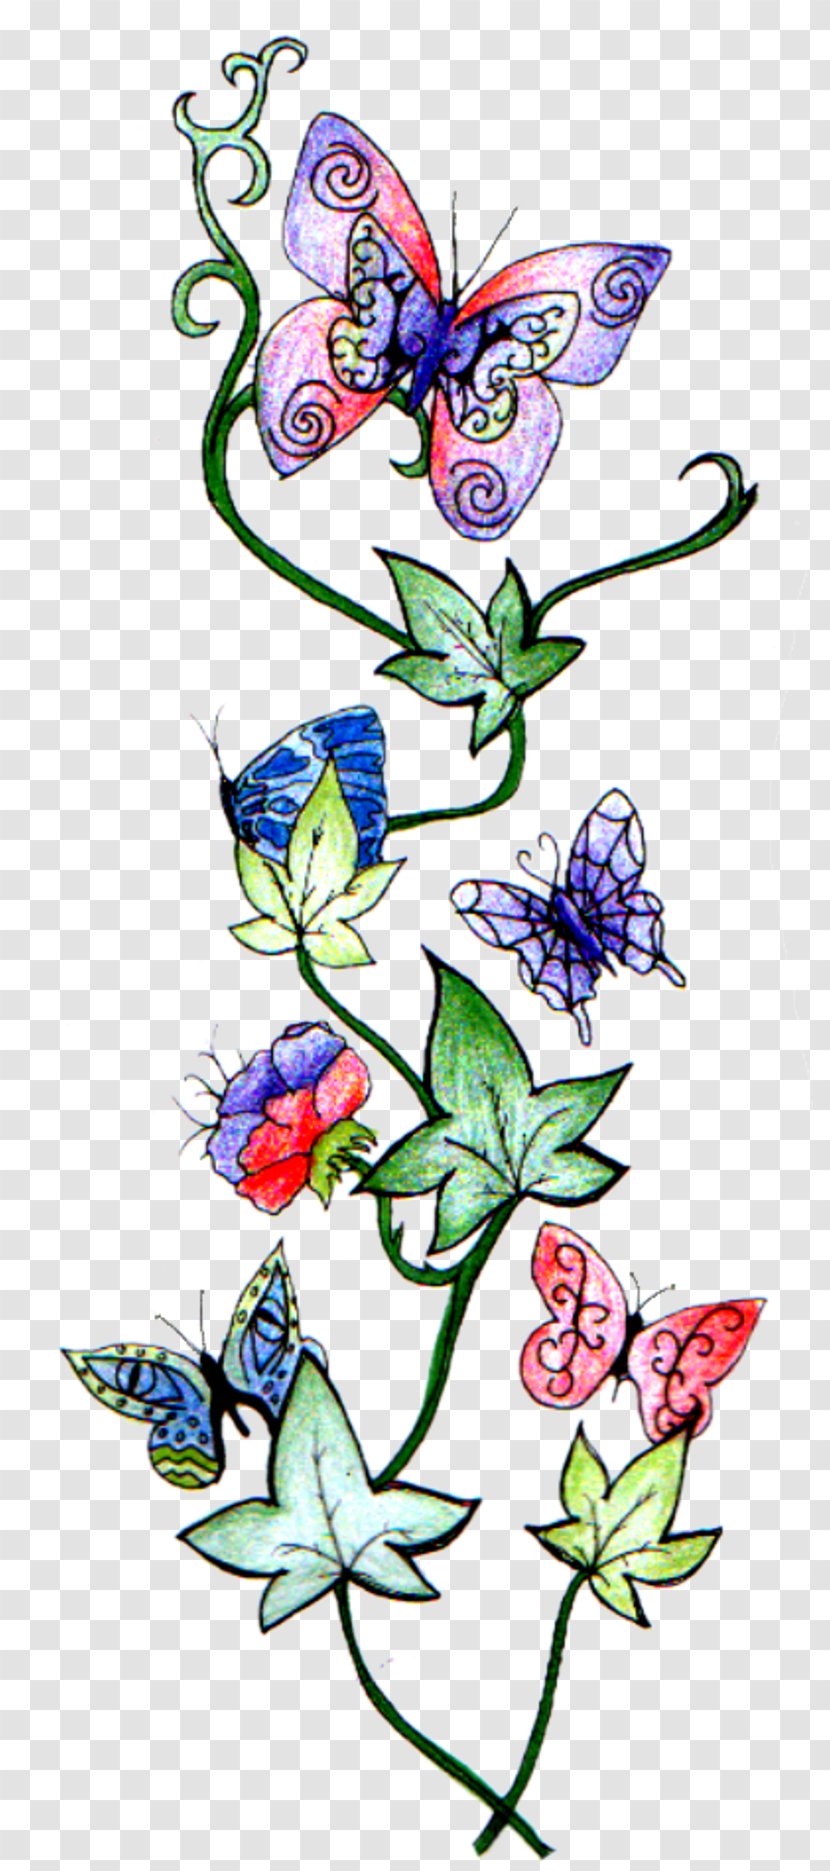 Sleeve Tattoo Vine Butterfly Design - Insect - Ivy Drawing Transparent PNG